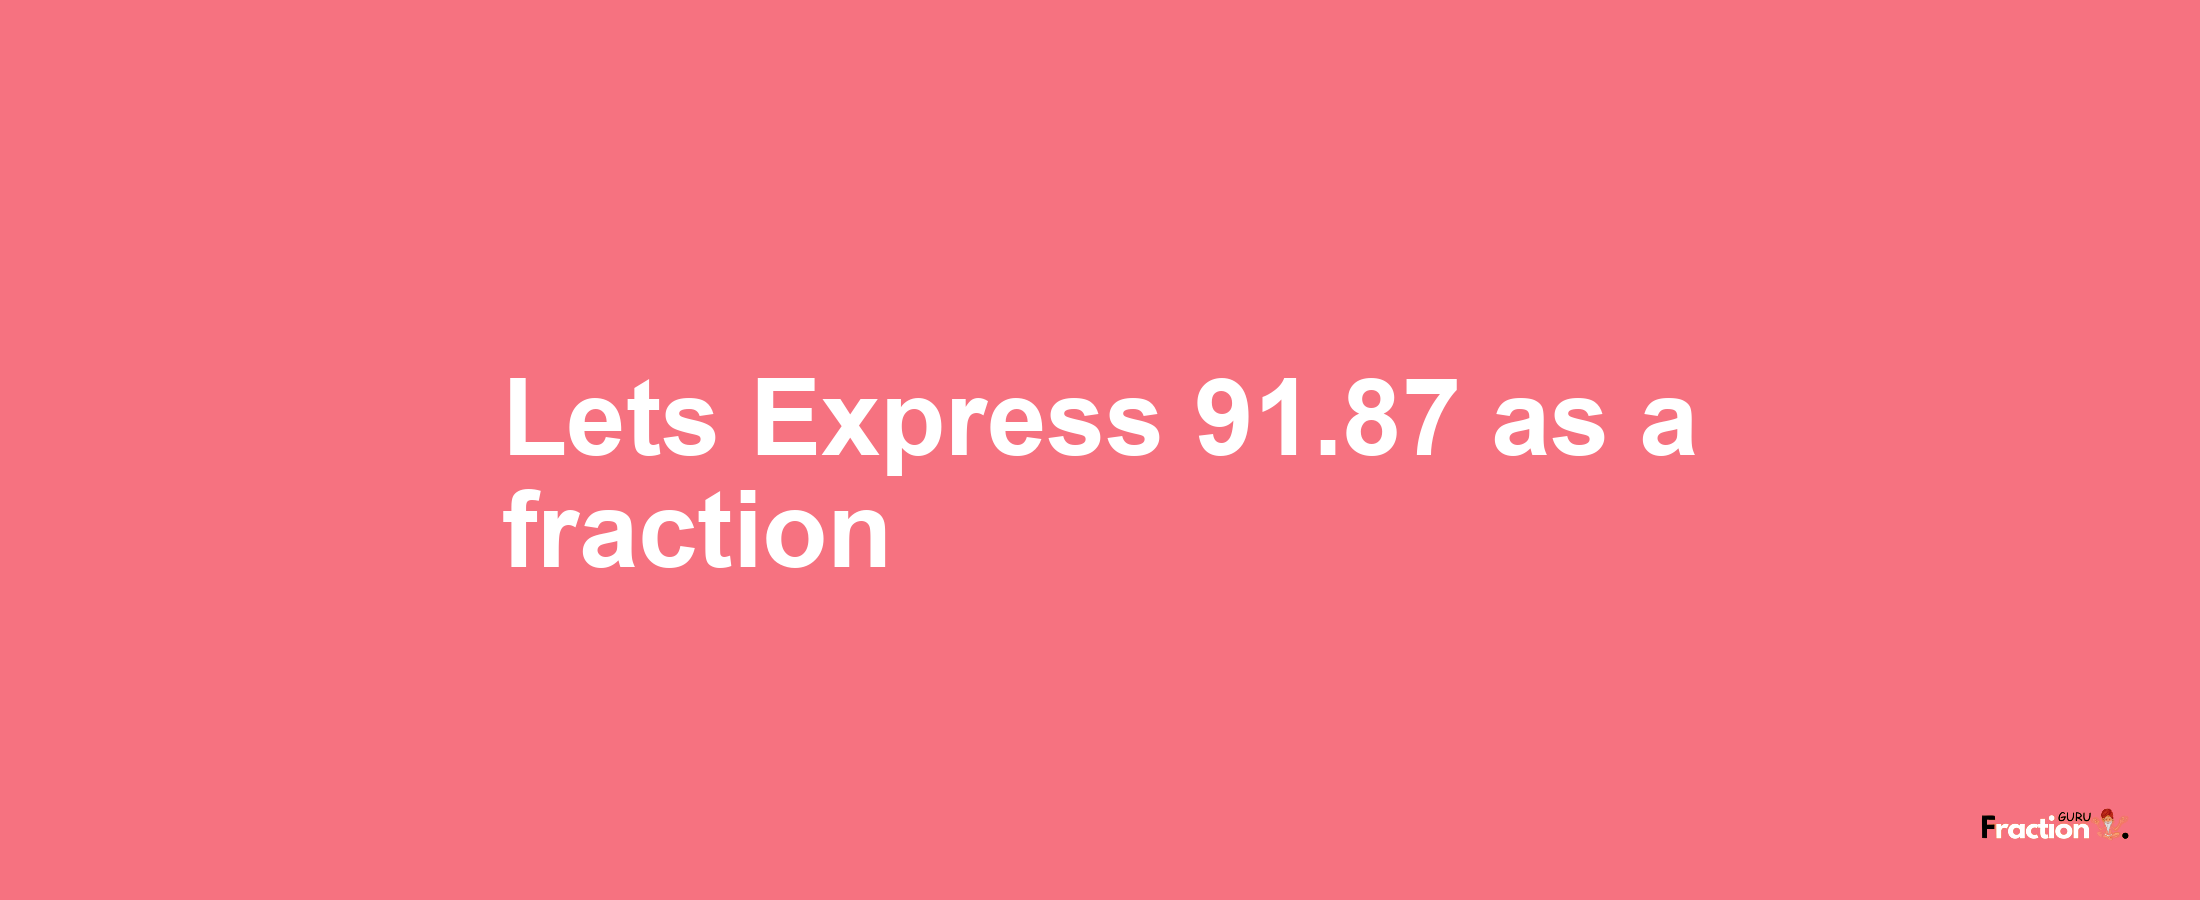 Lets Express 91.87 as afraction